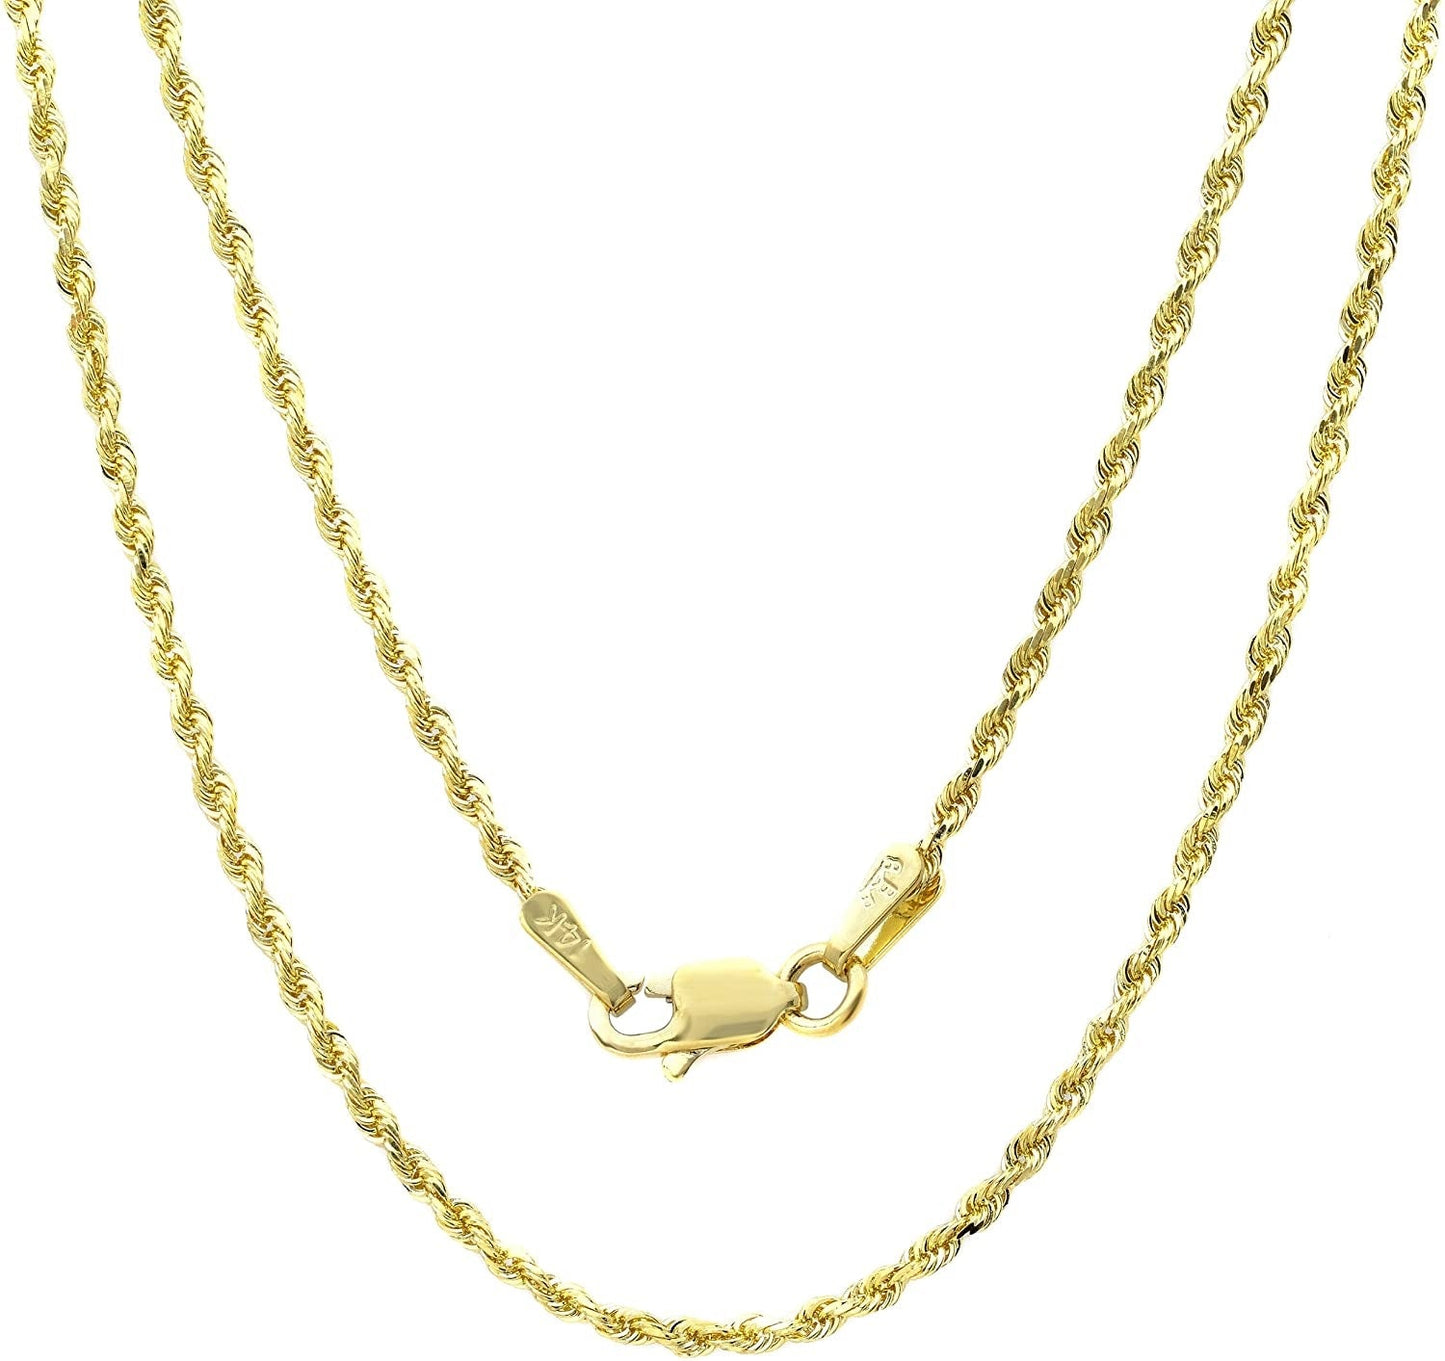 Singapore Twist Rope Chain | 14k Gold Necklace